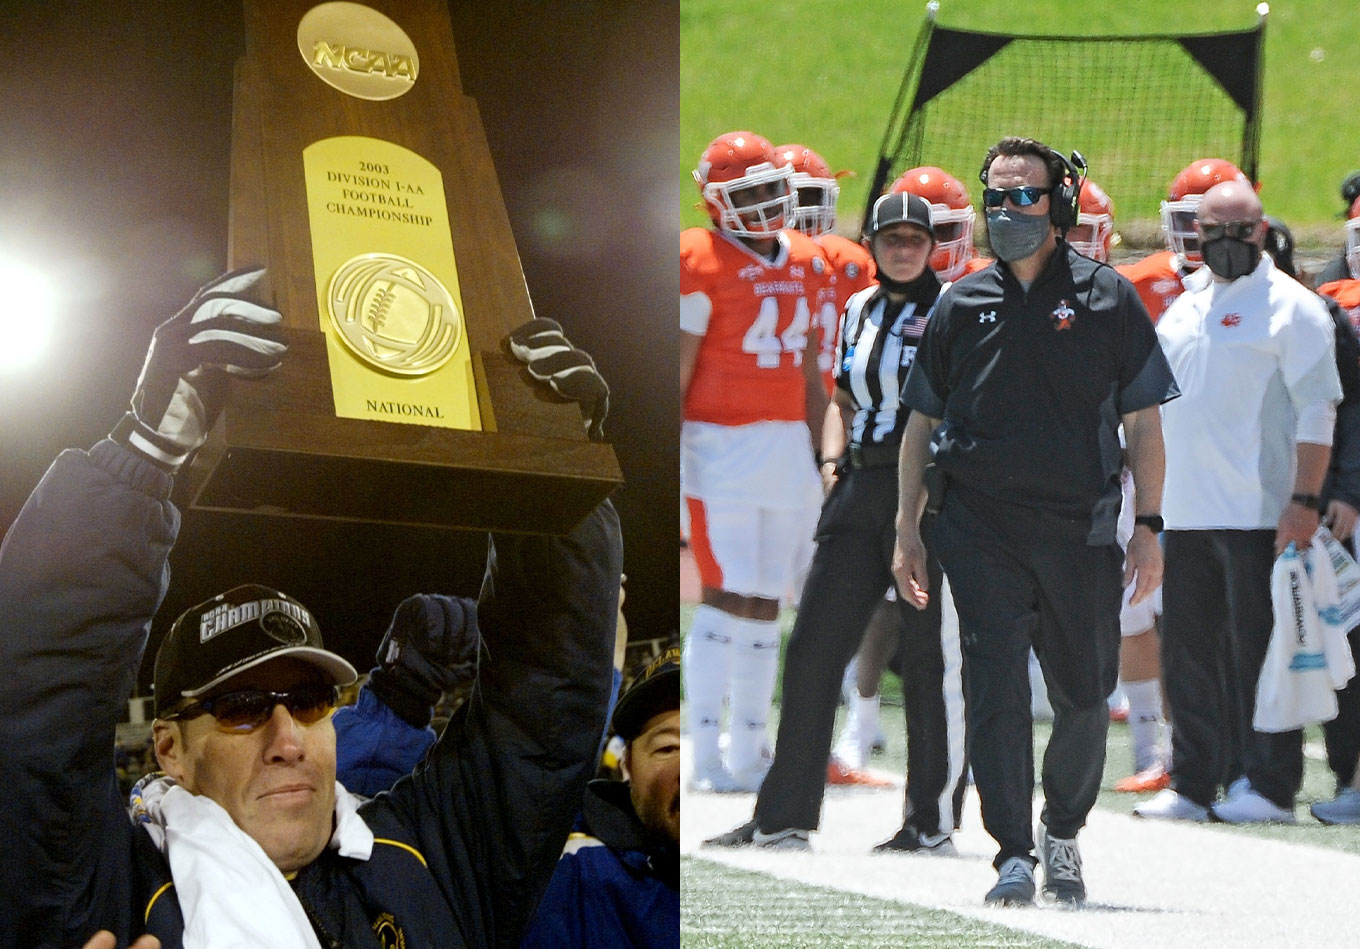 Ranking the Storylines of Potential FCS Championship Game Matchups